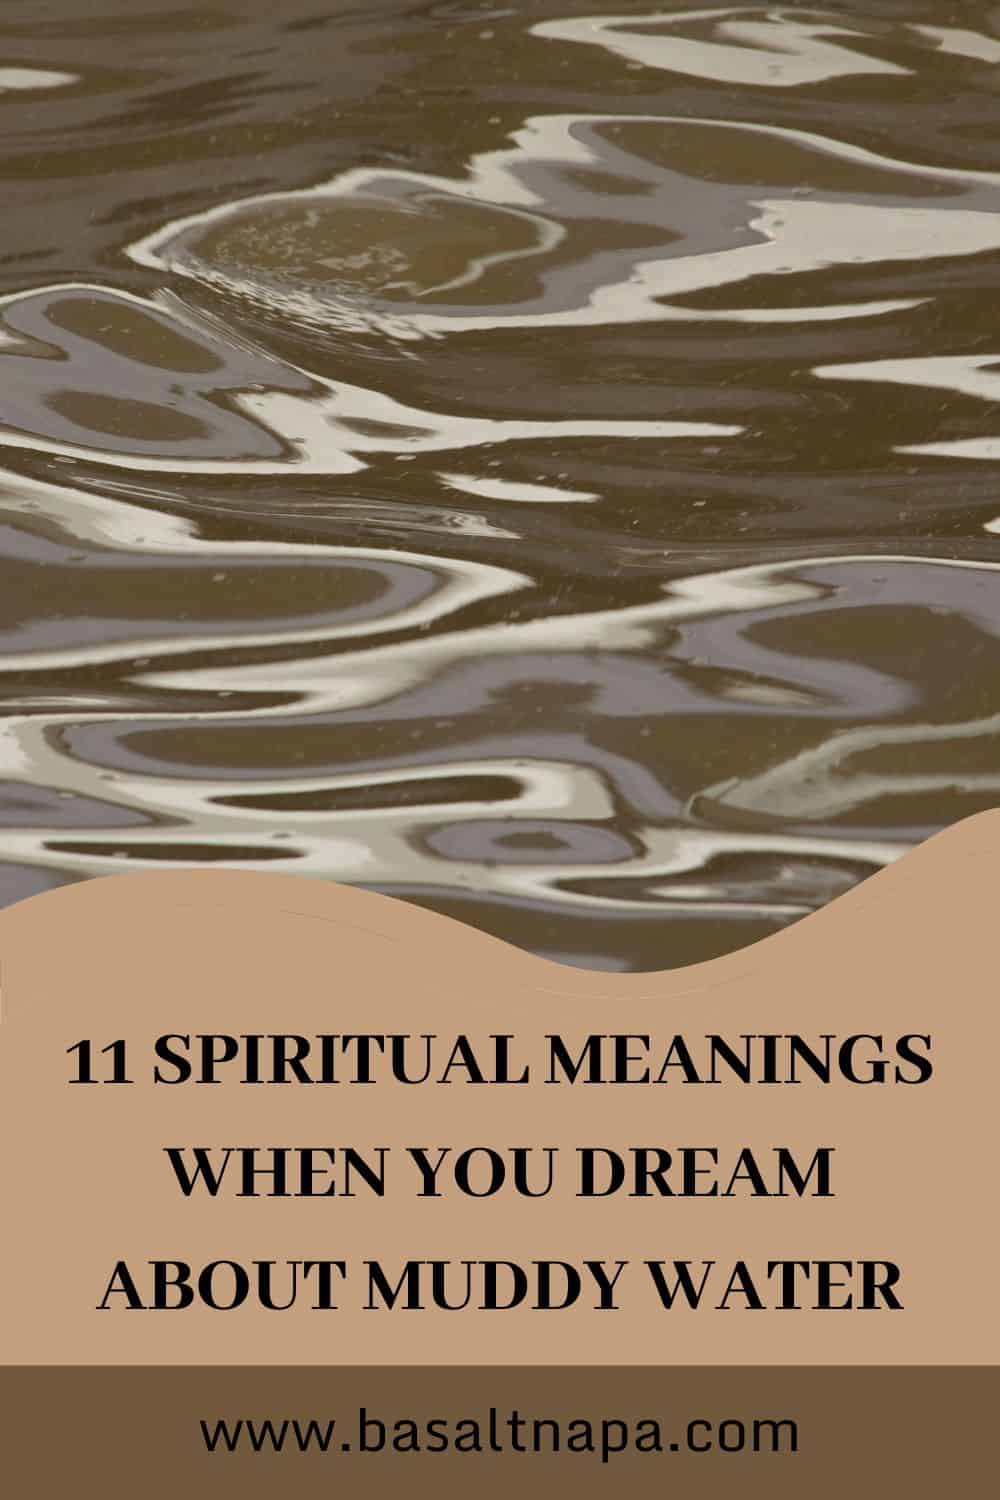 11 Spiritual Meanings When You Dream About Muddy Water